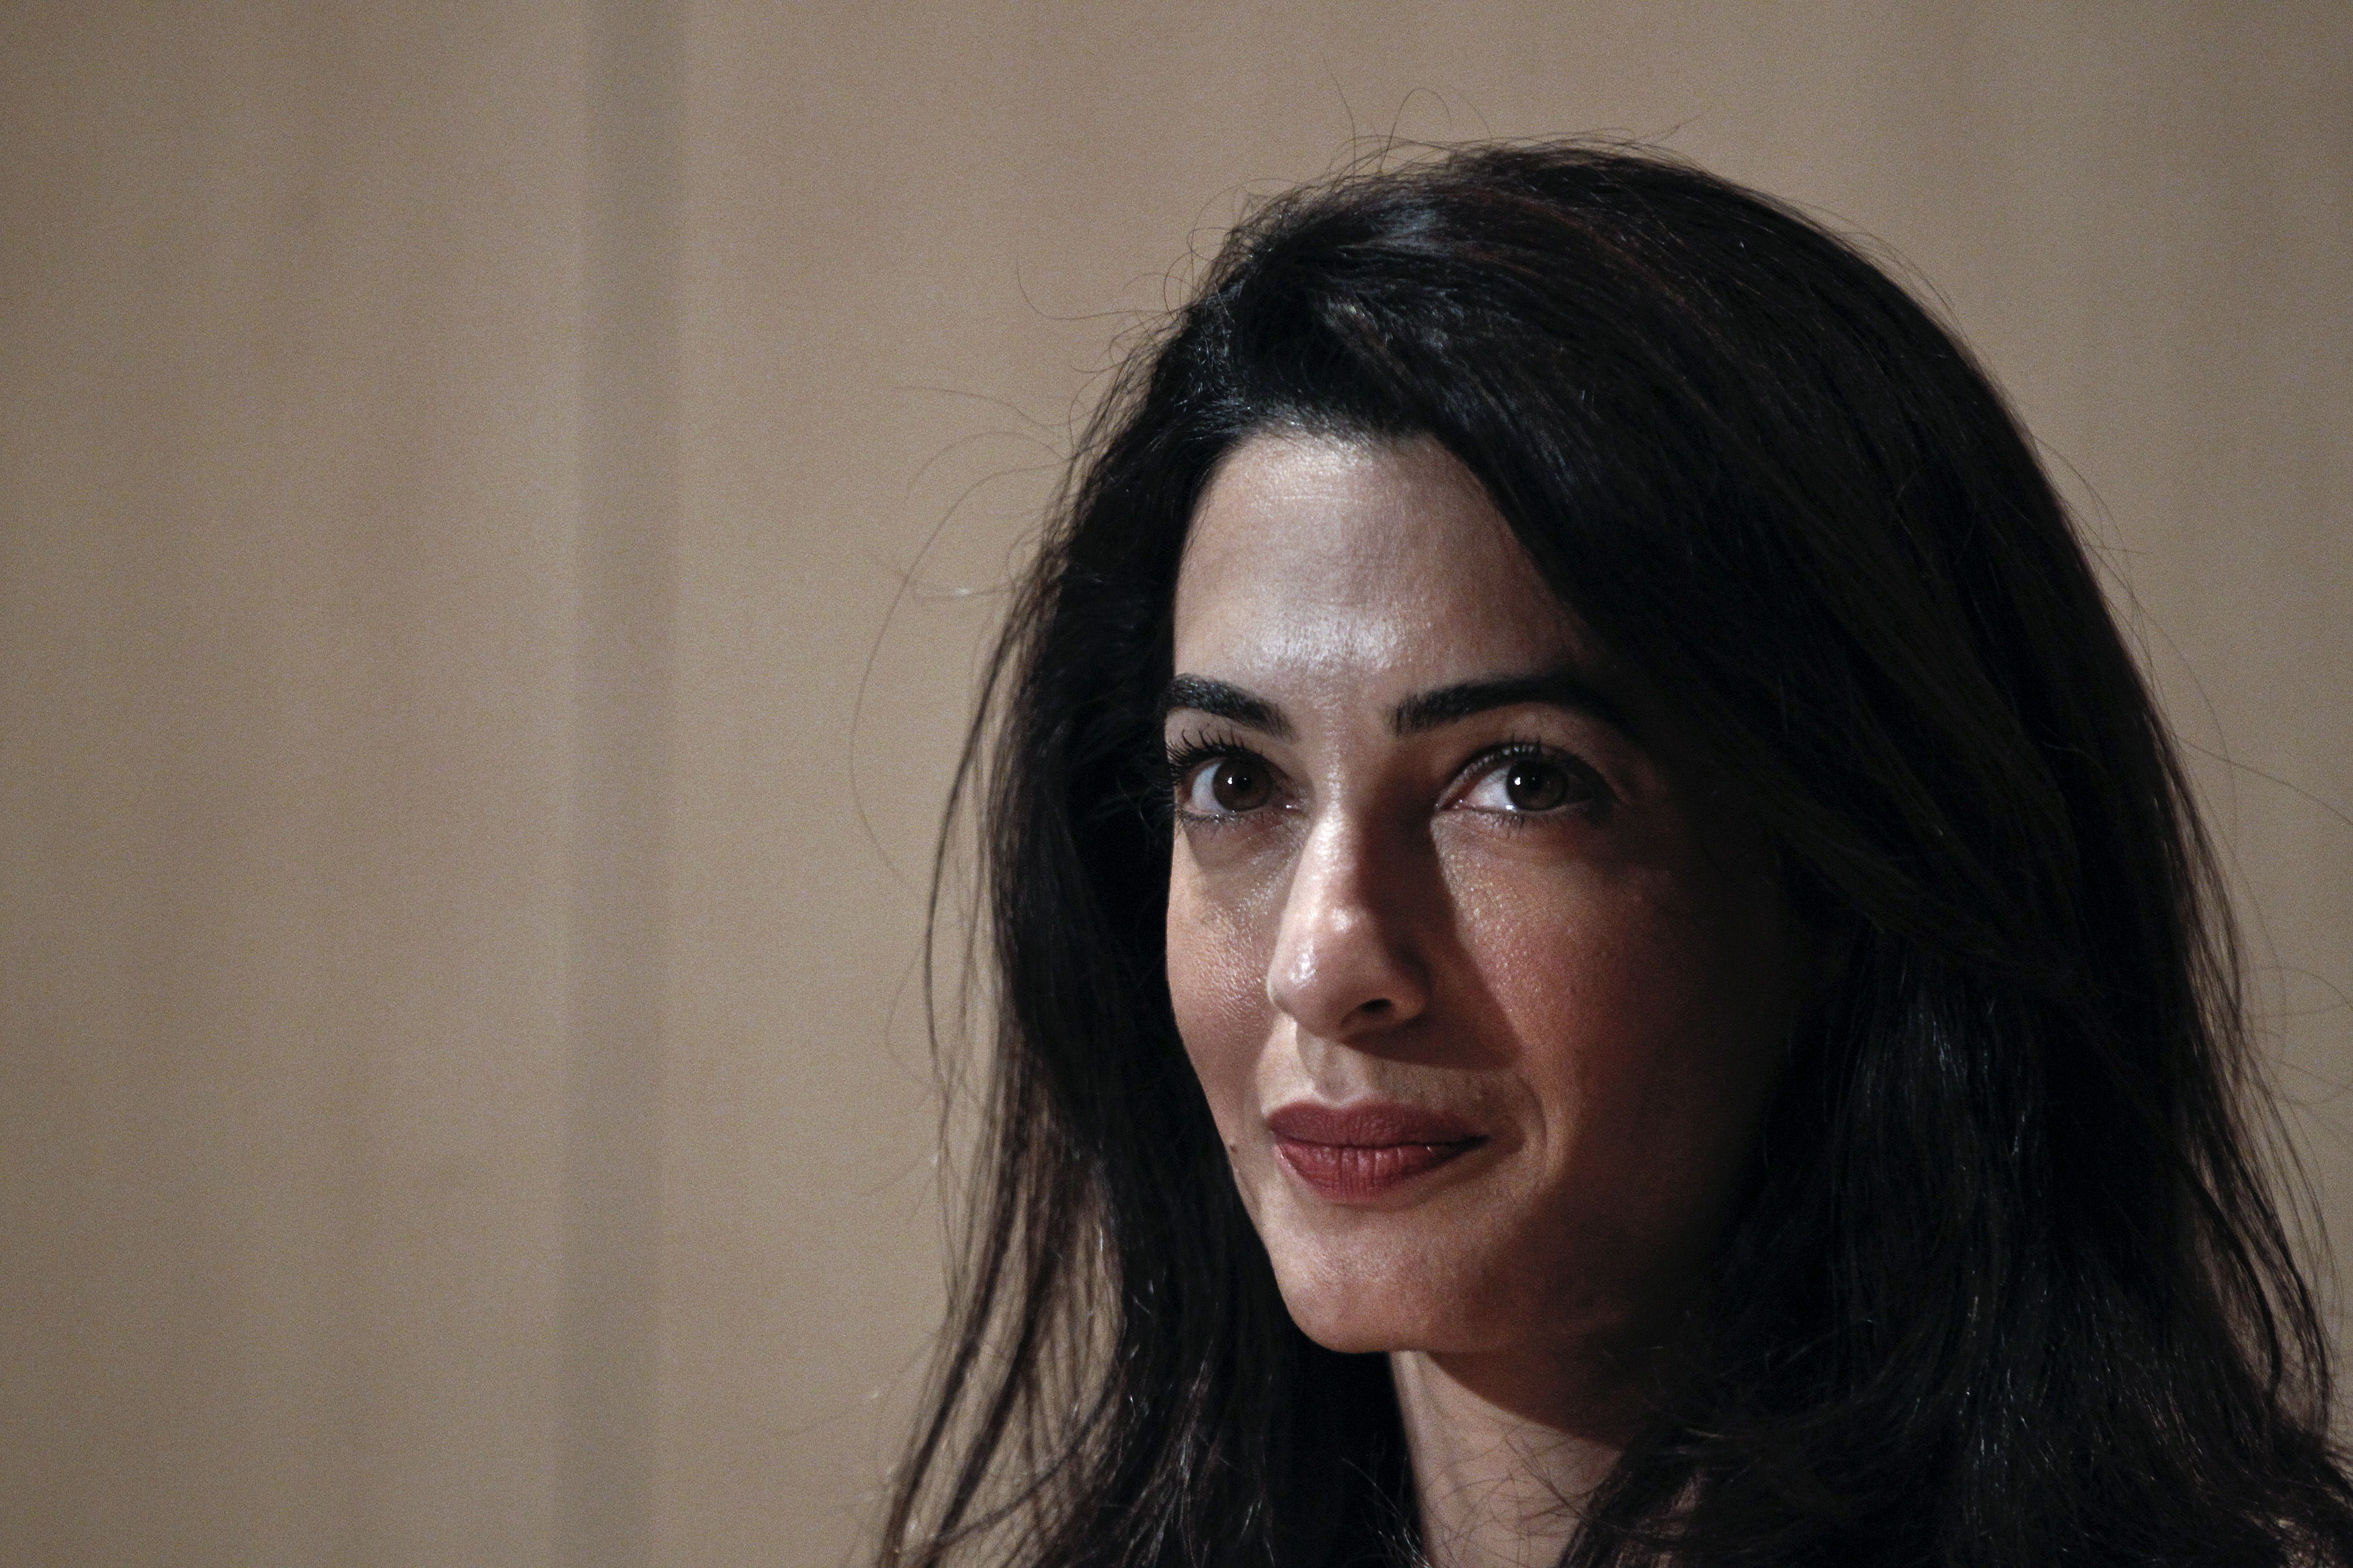 Human-rights lawyer Amal Alamuddin Clooney looks on during a news conference at the Acropolis museum in Athens on Oct. 15, 2014 (Alkis Konstantinidis—Reuters)